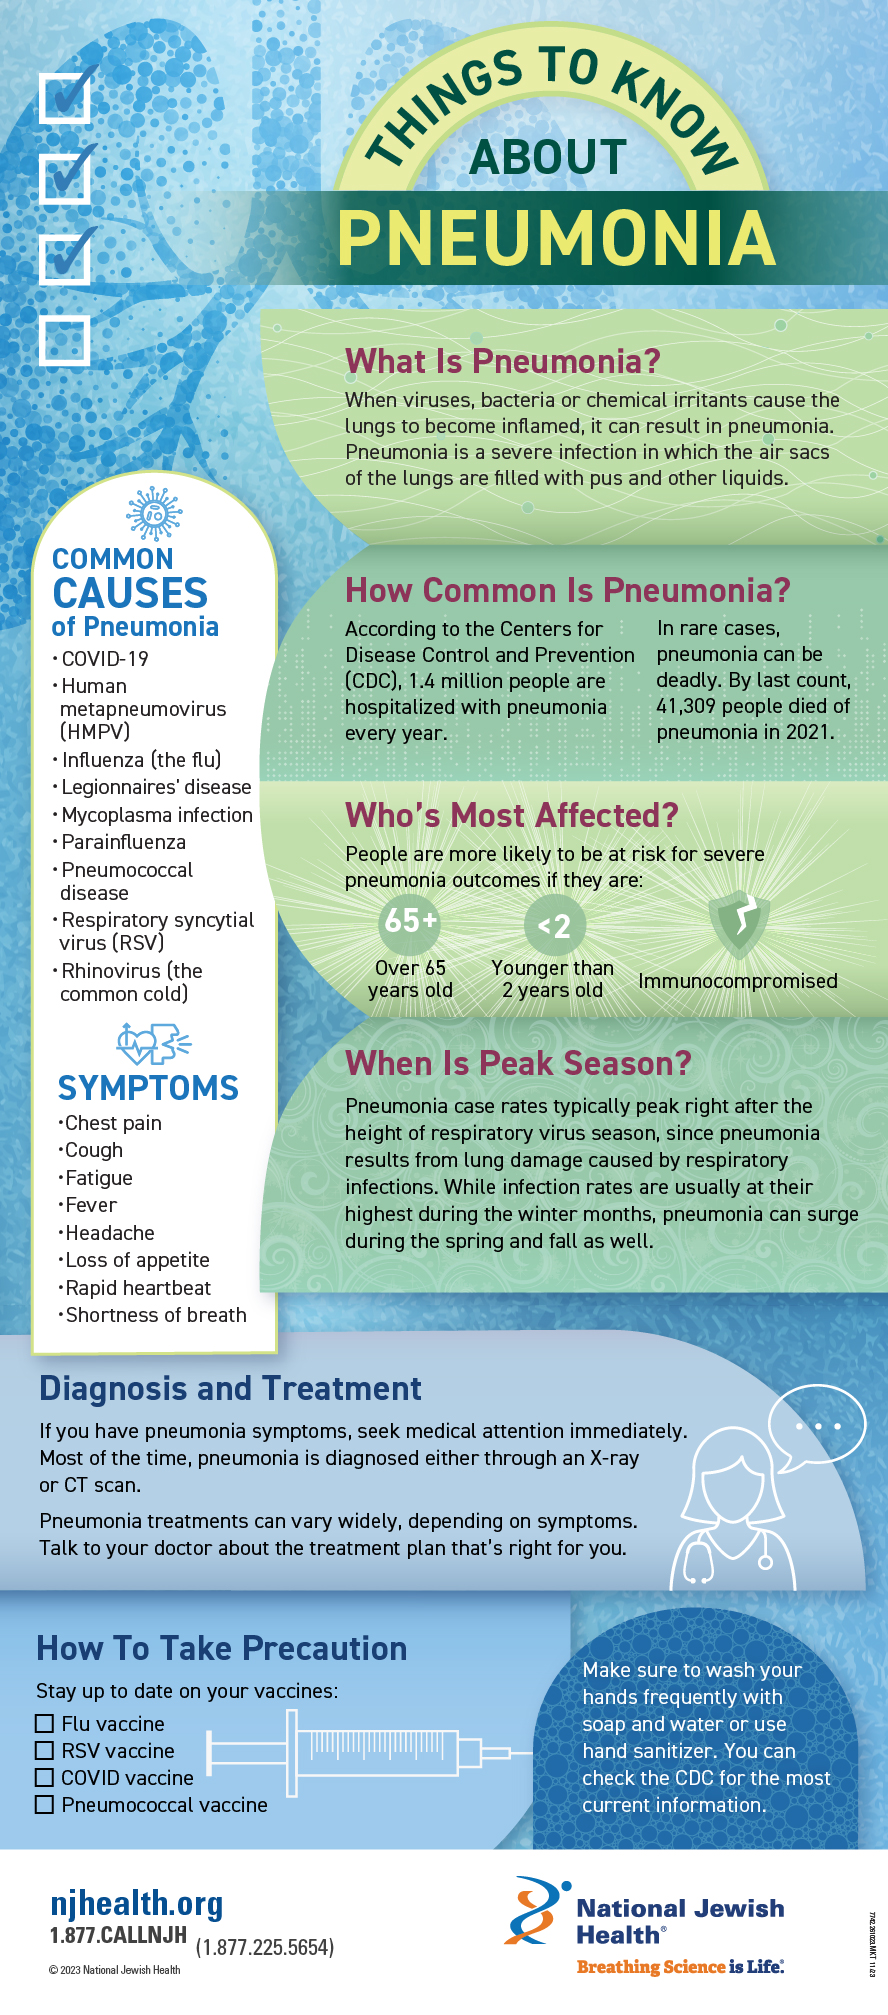 Things to Know About Pneumonia Infographic